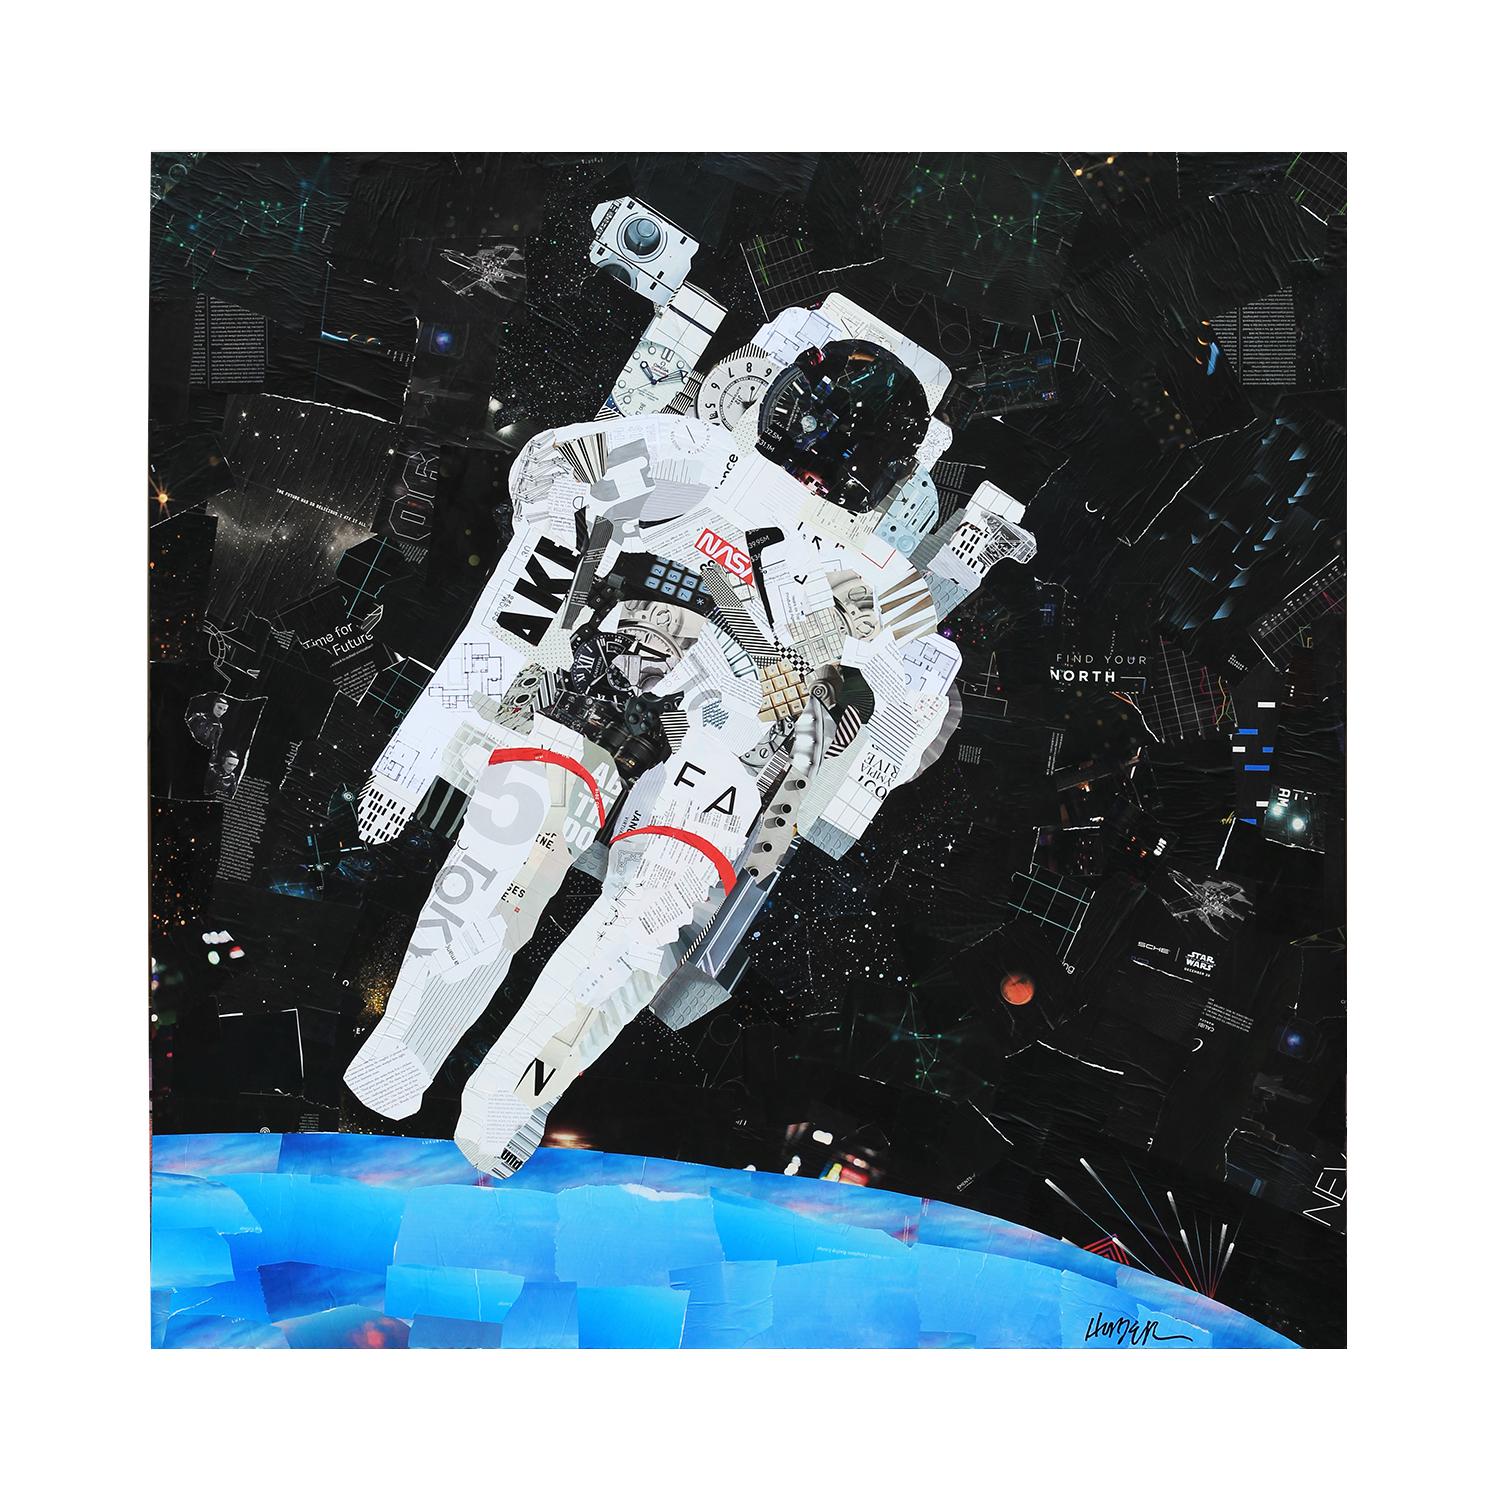 “Spacewalk” Floating Astronaut Mixed Media Pop Art Assemblage Collage - Painting by Jim Hudek